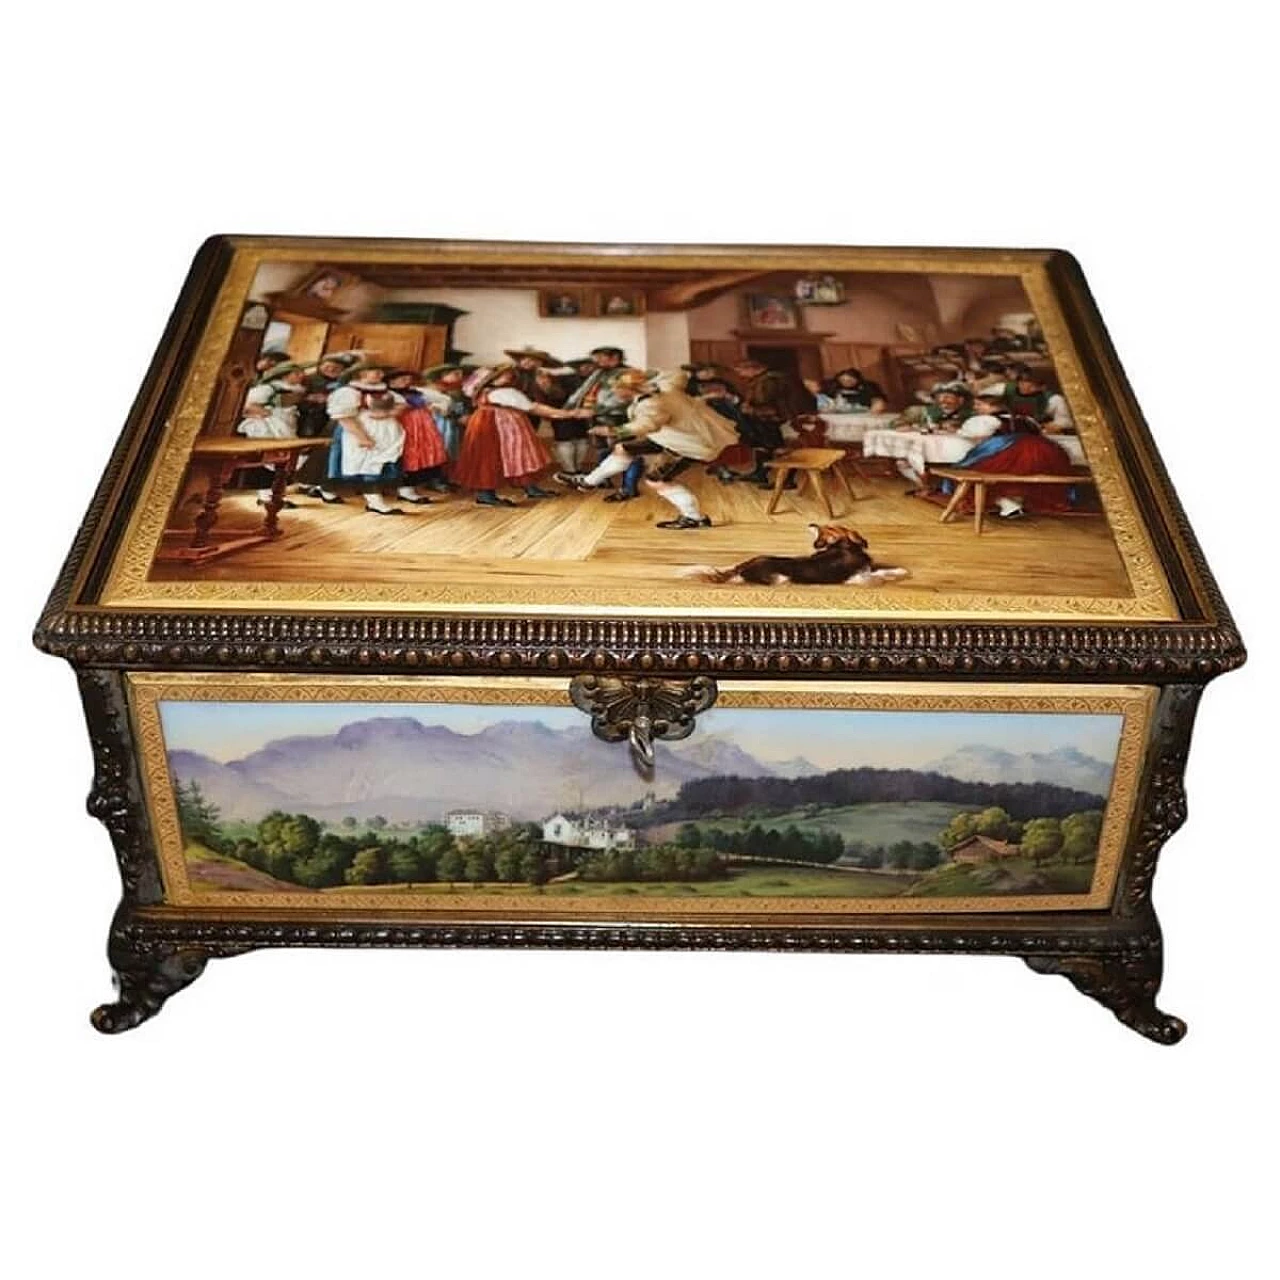 Bronze and hand-painted porcelain jewelry box by KPM, 19th century 1